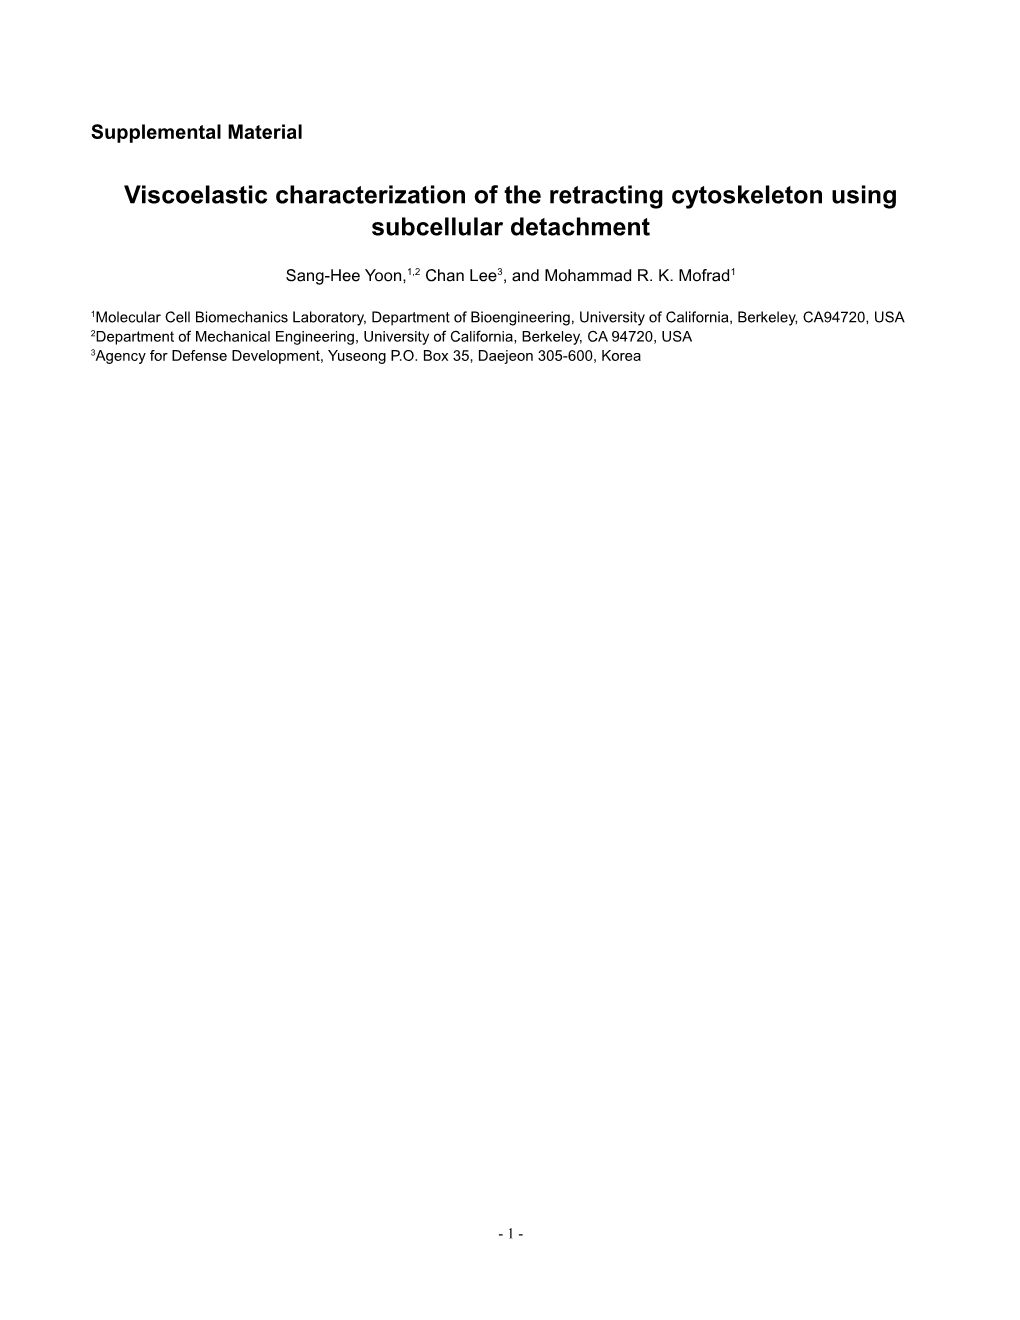 Viscoelastic Characterization of the Retracting Cytoskeleton Using Subcellular Detachment